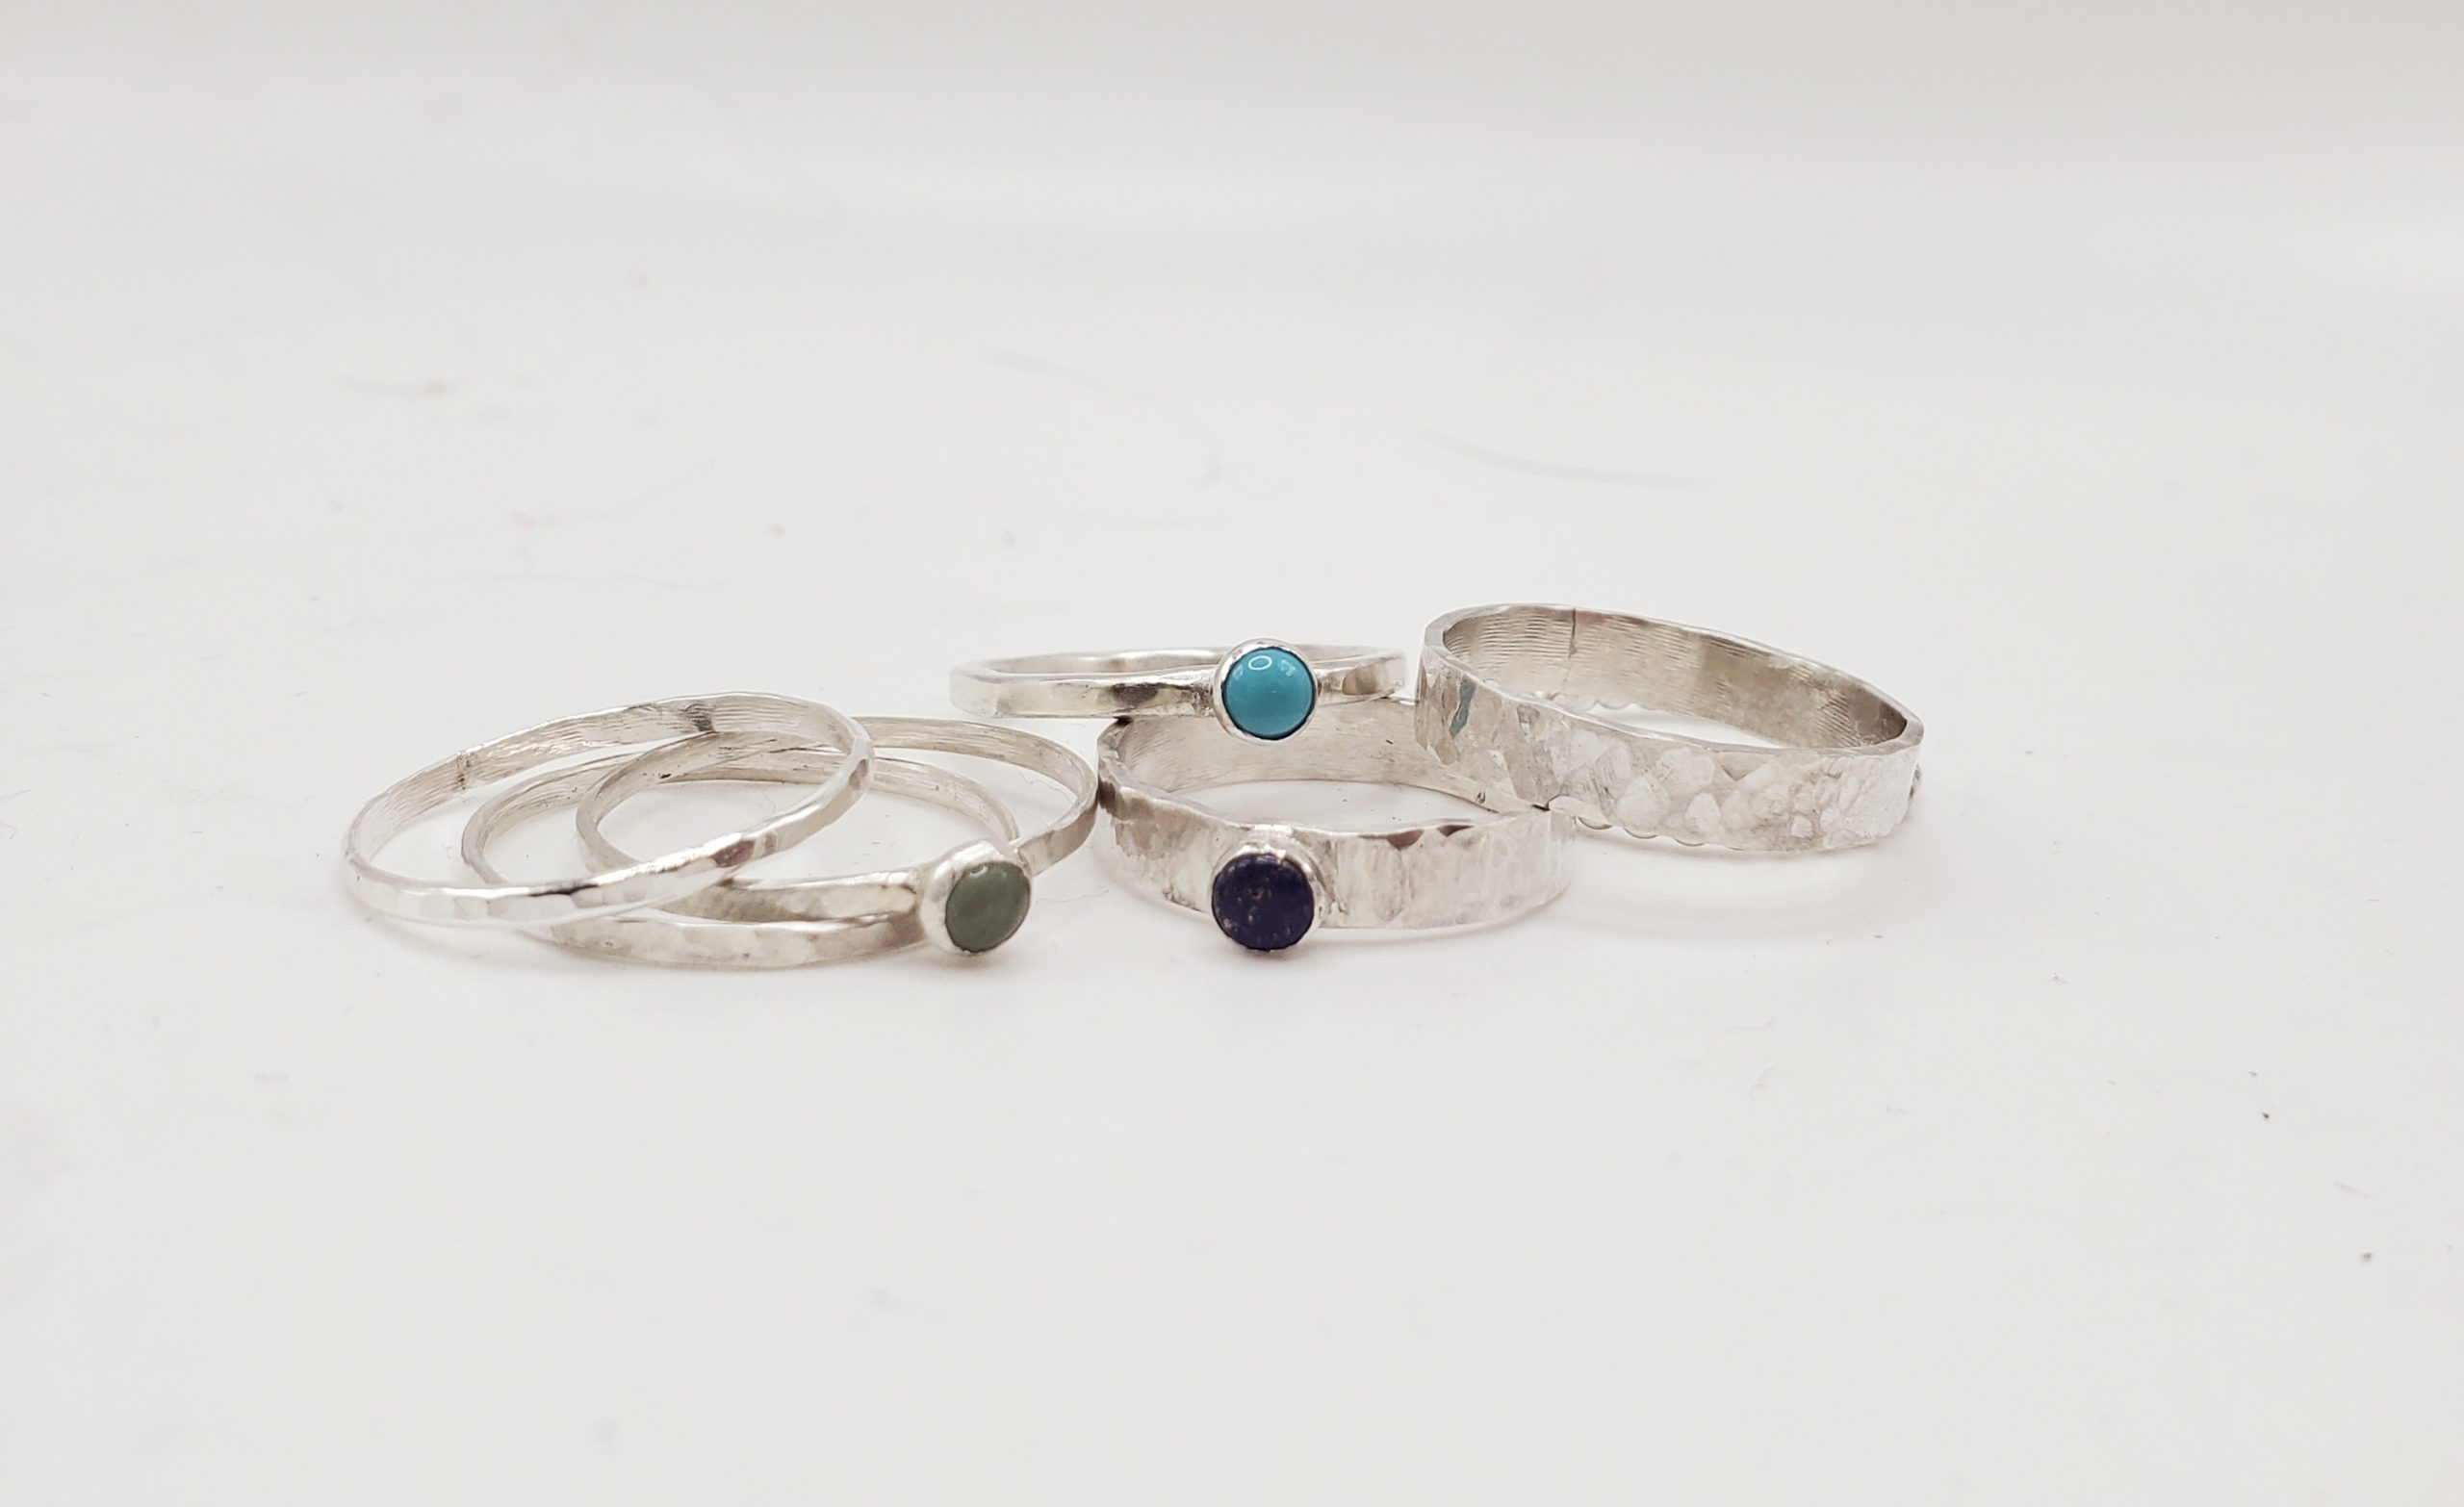 Pile of sterling silver rings. Some with gemstones